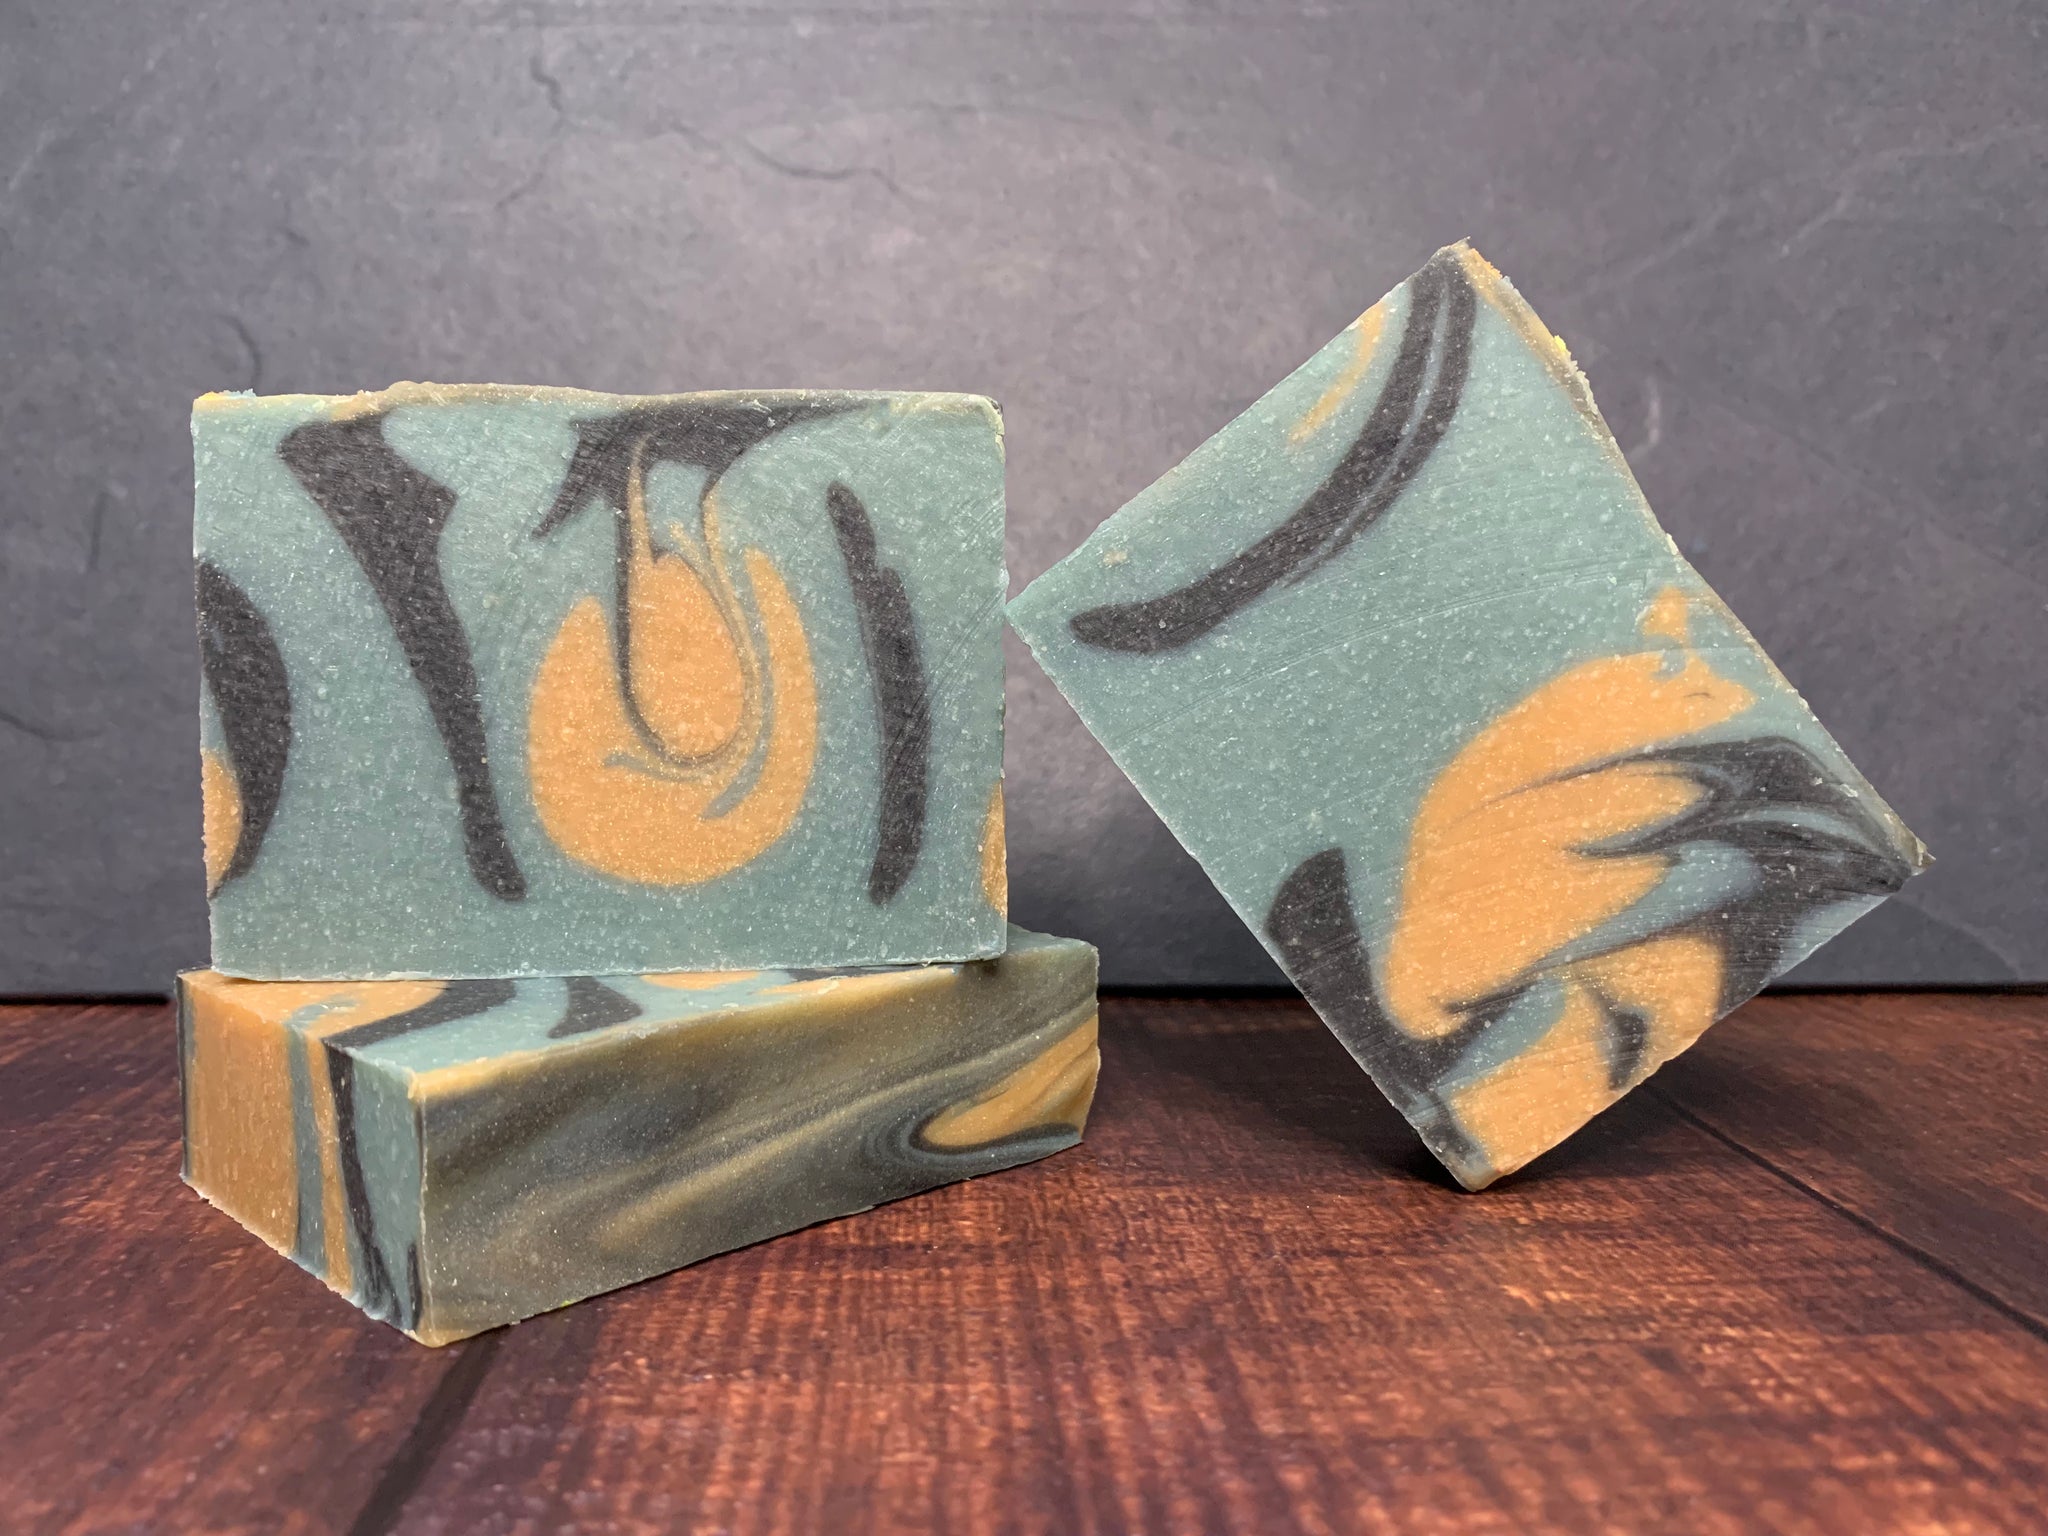 summer time beer soap for him handmade in texas with Hamilton pale American pale ale from family business beer co texas craft brewery black gold and blue beer soap for him with activated charcoal handcrafted by spunkndisorderly beer soaps cold process swirl beer soap